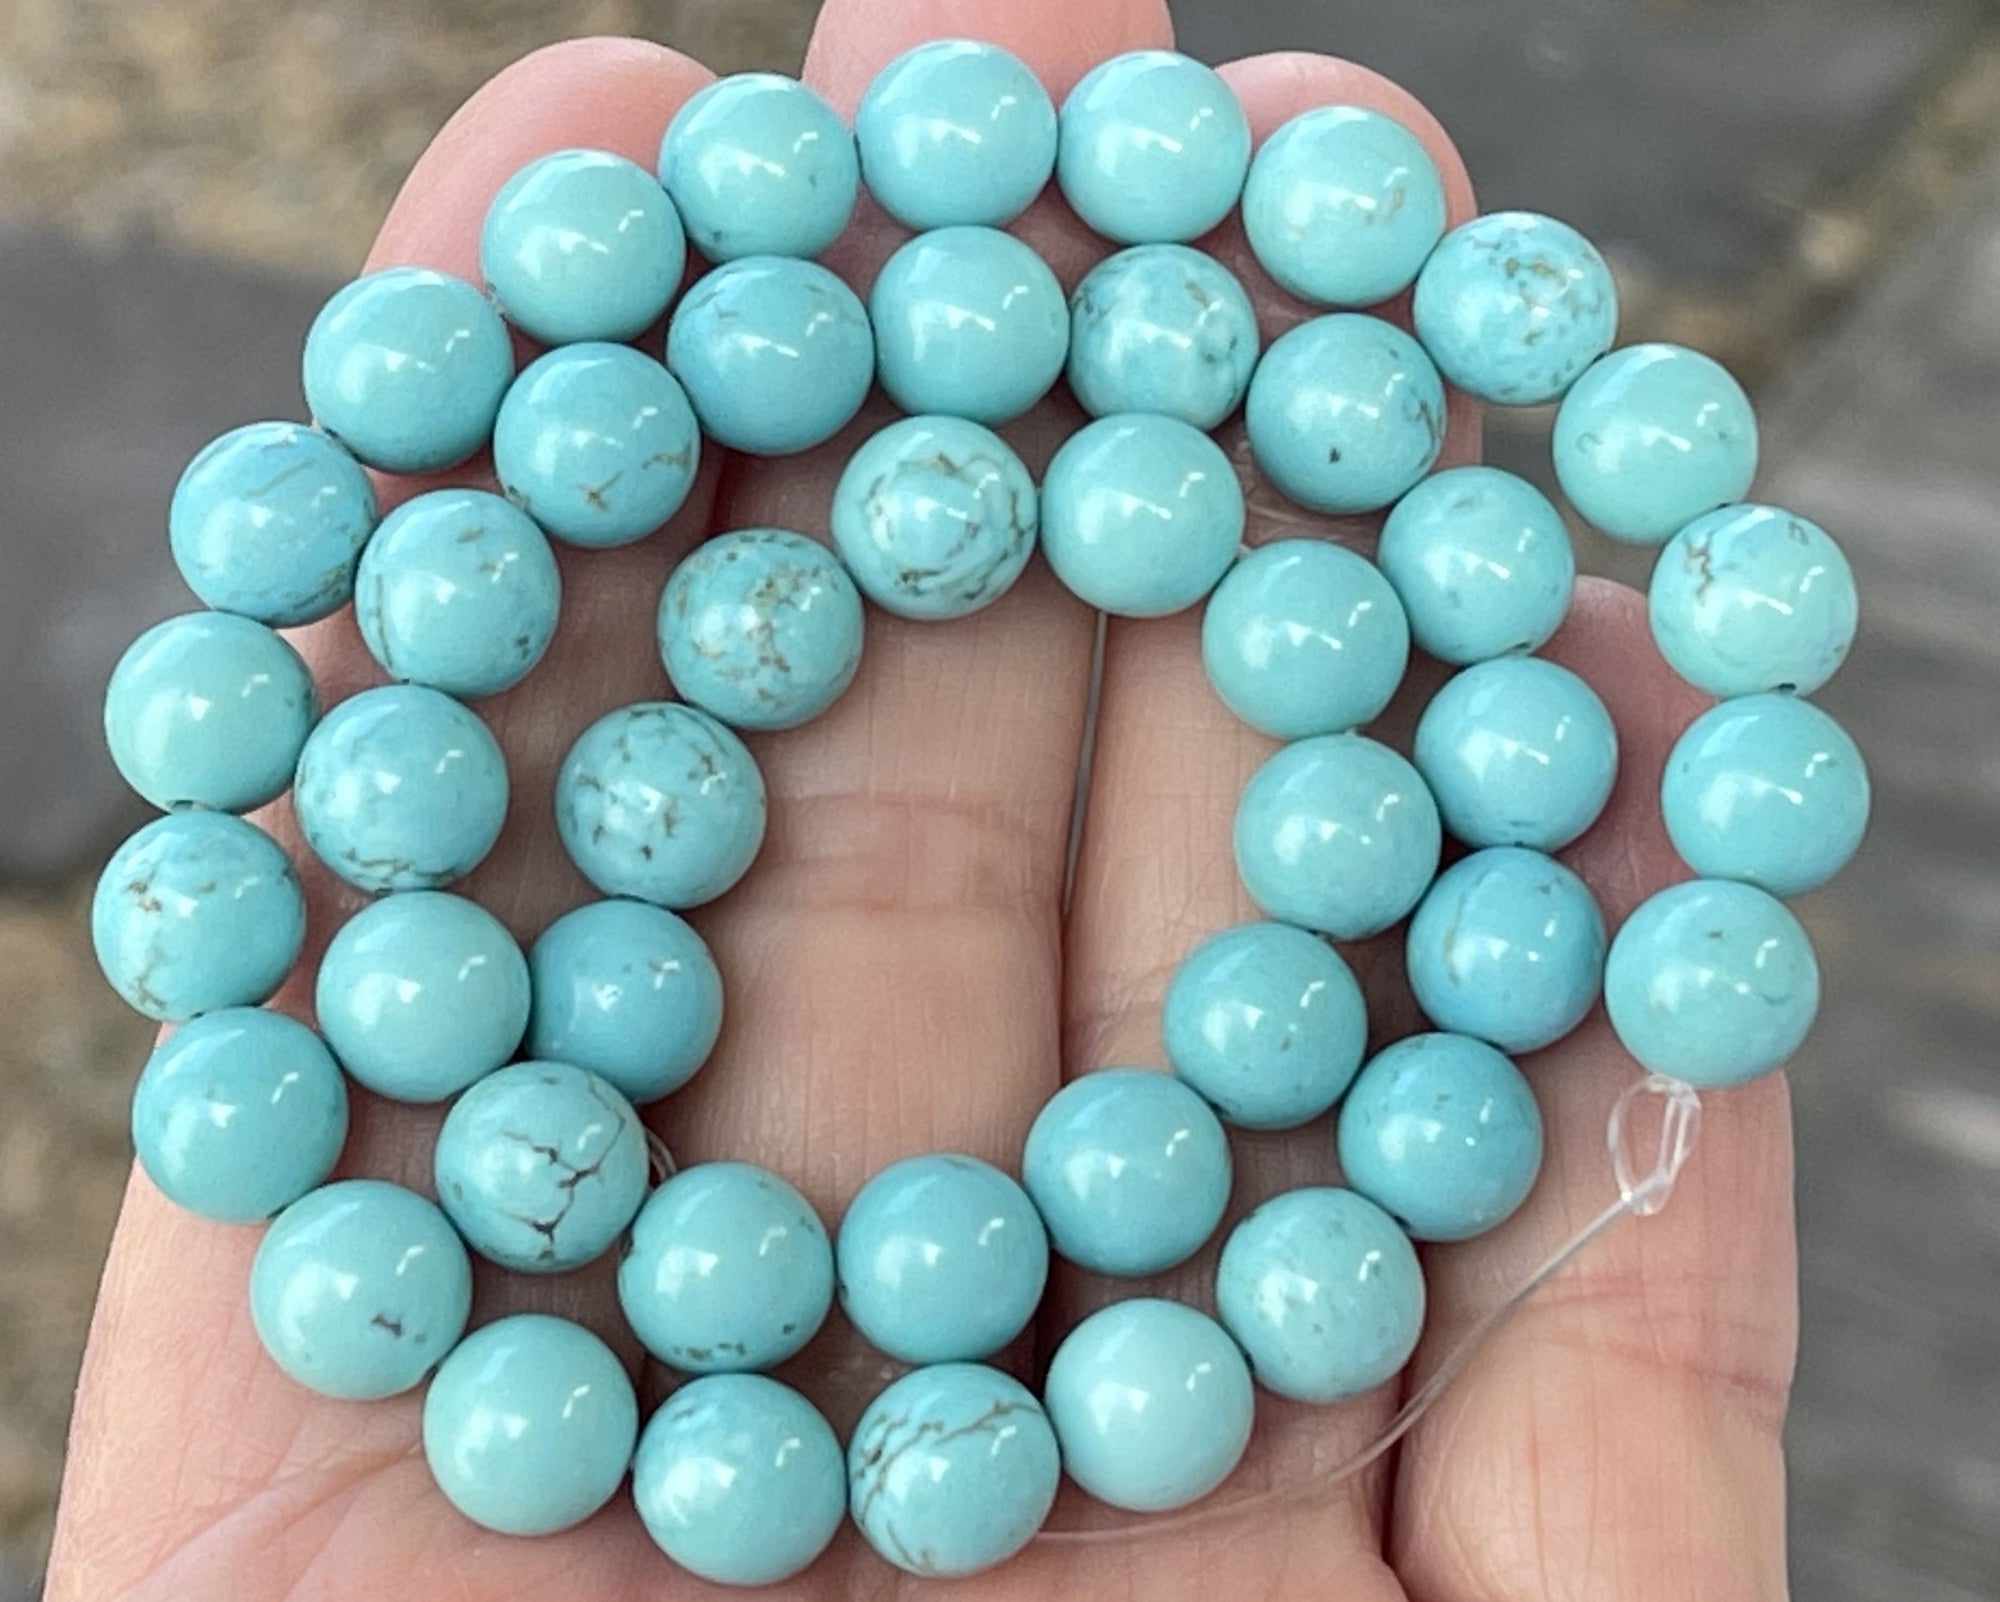 Chinese Blue Turquoise 8mm round stabilized turquoise beads 15" strand